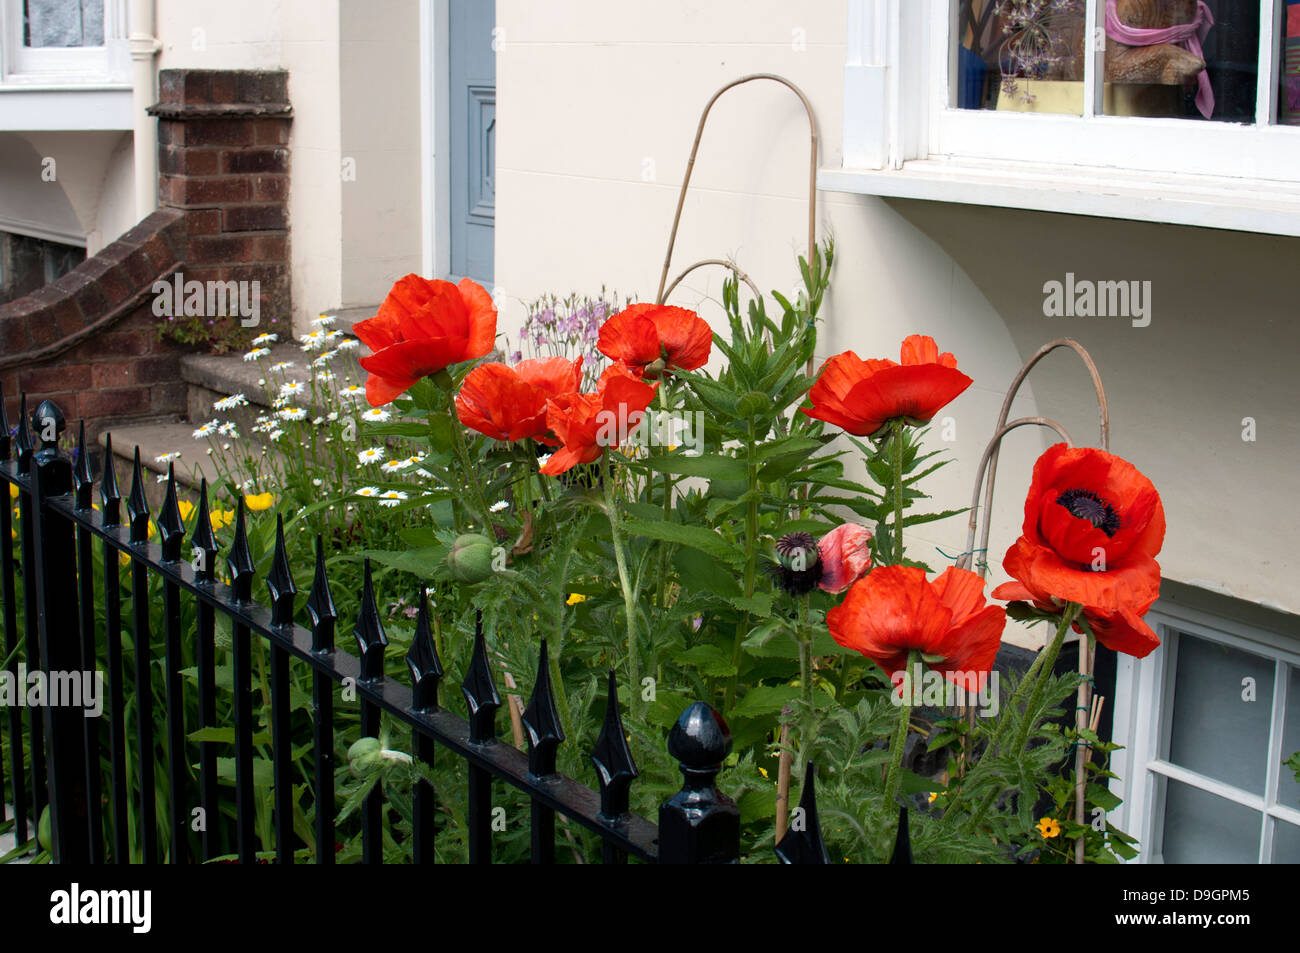 Small front garden with red poppies Stock Photo